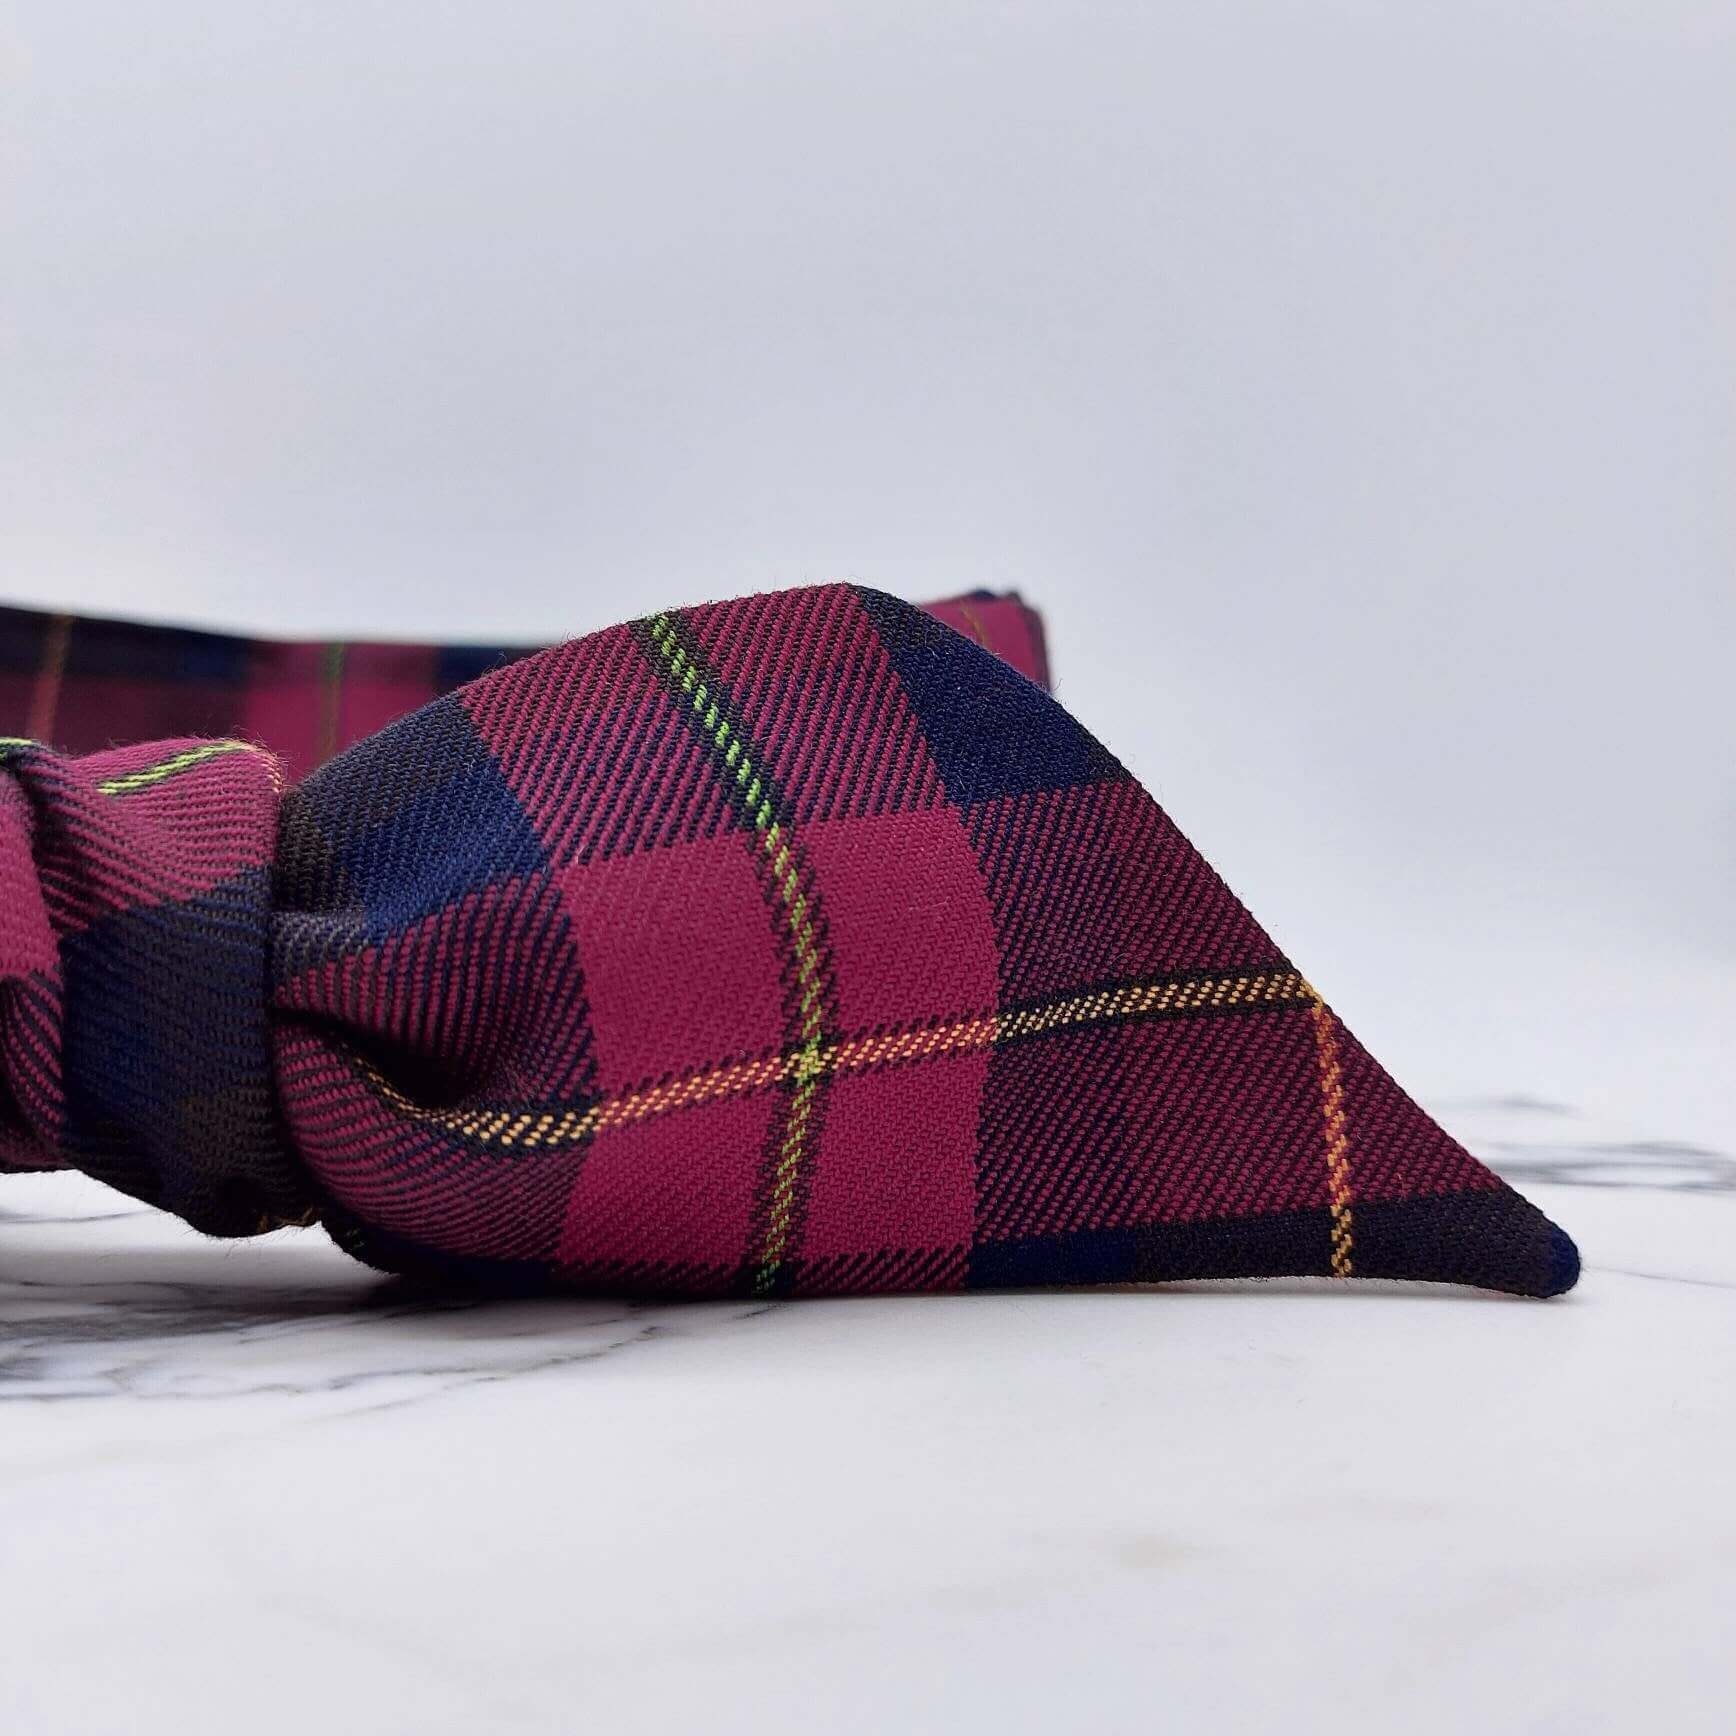 A dark cranberry and brown fabric, tartan paid tie headscarf, tied in a pretty knot.